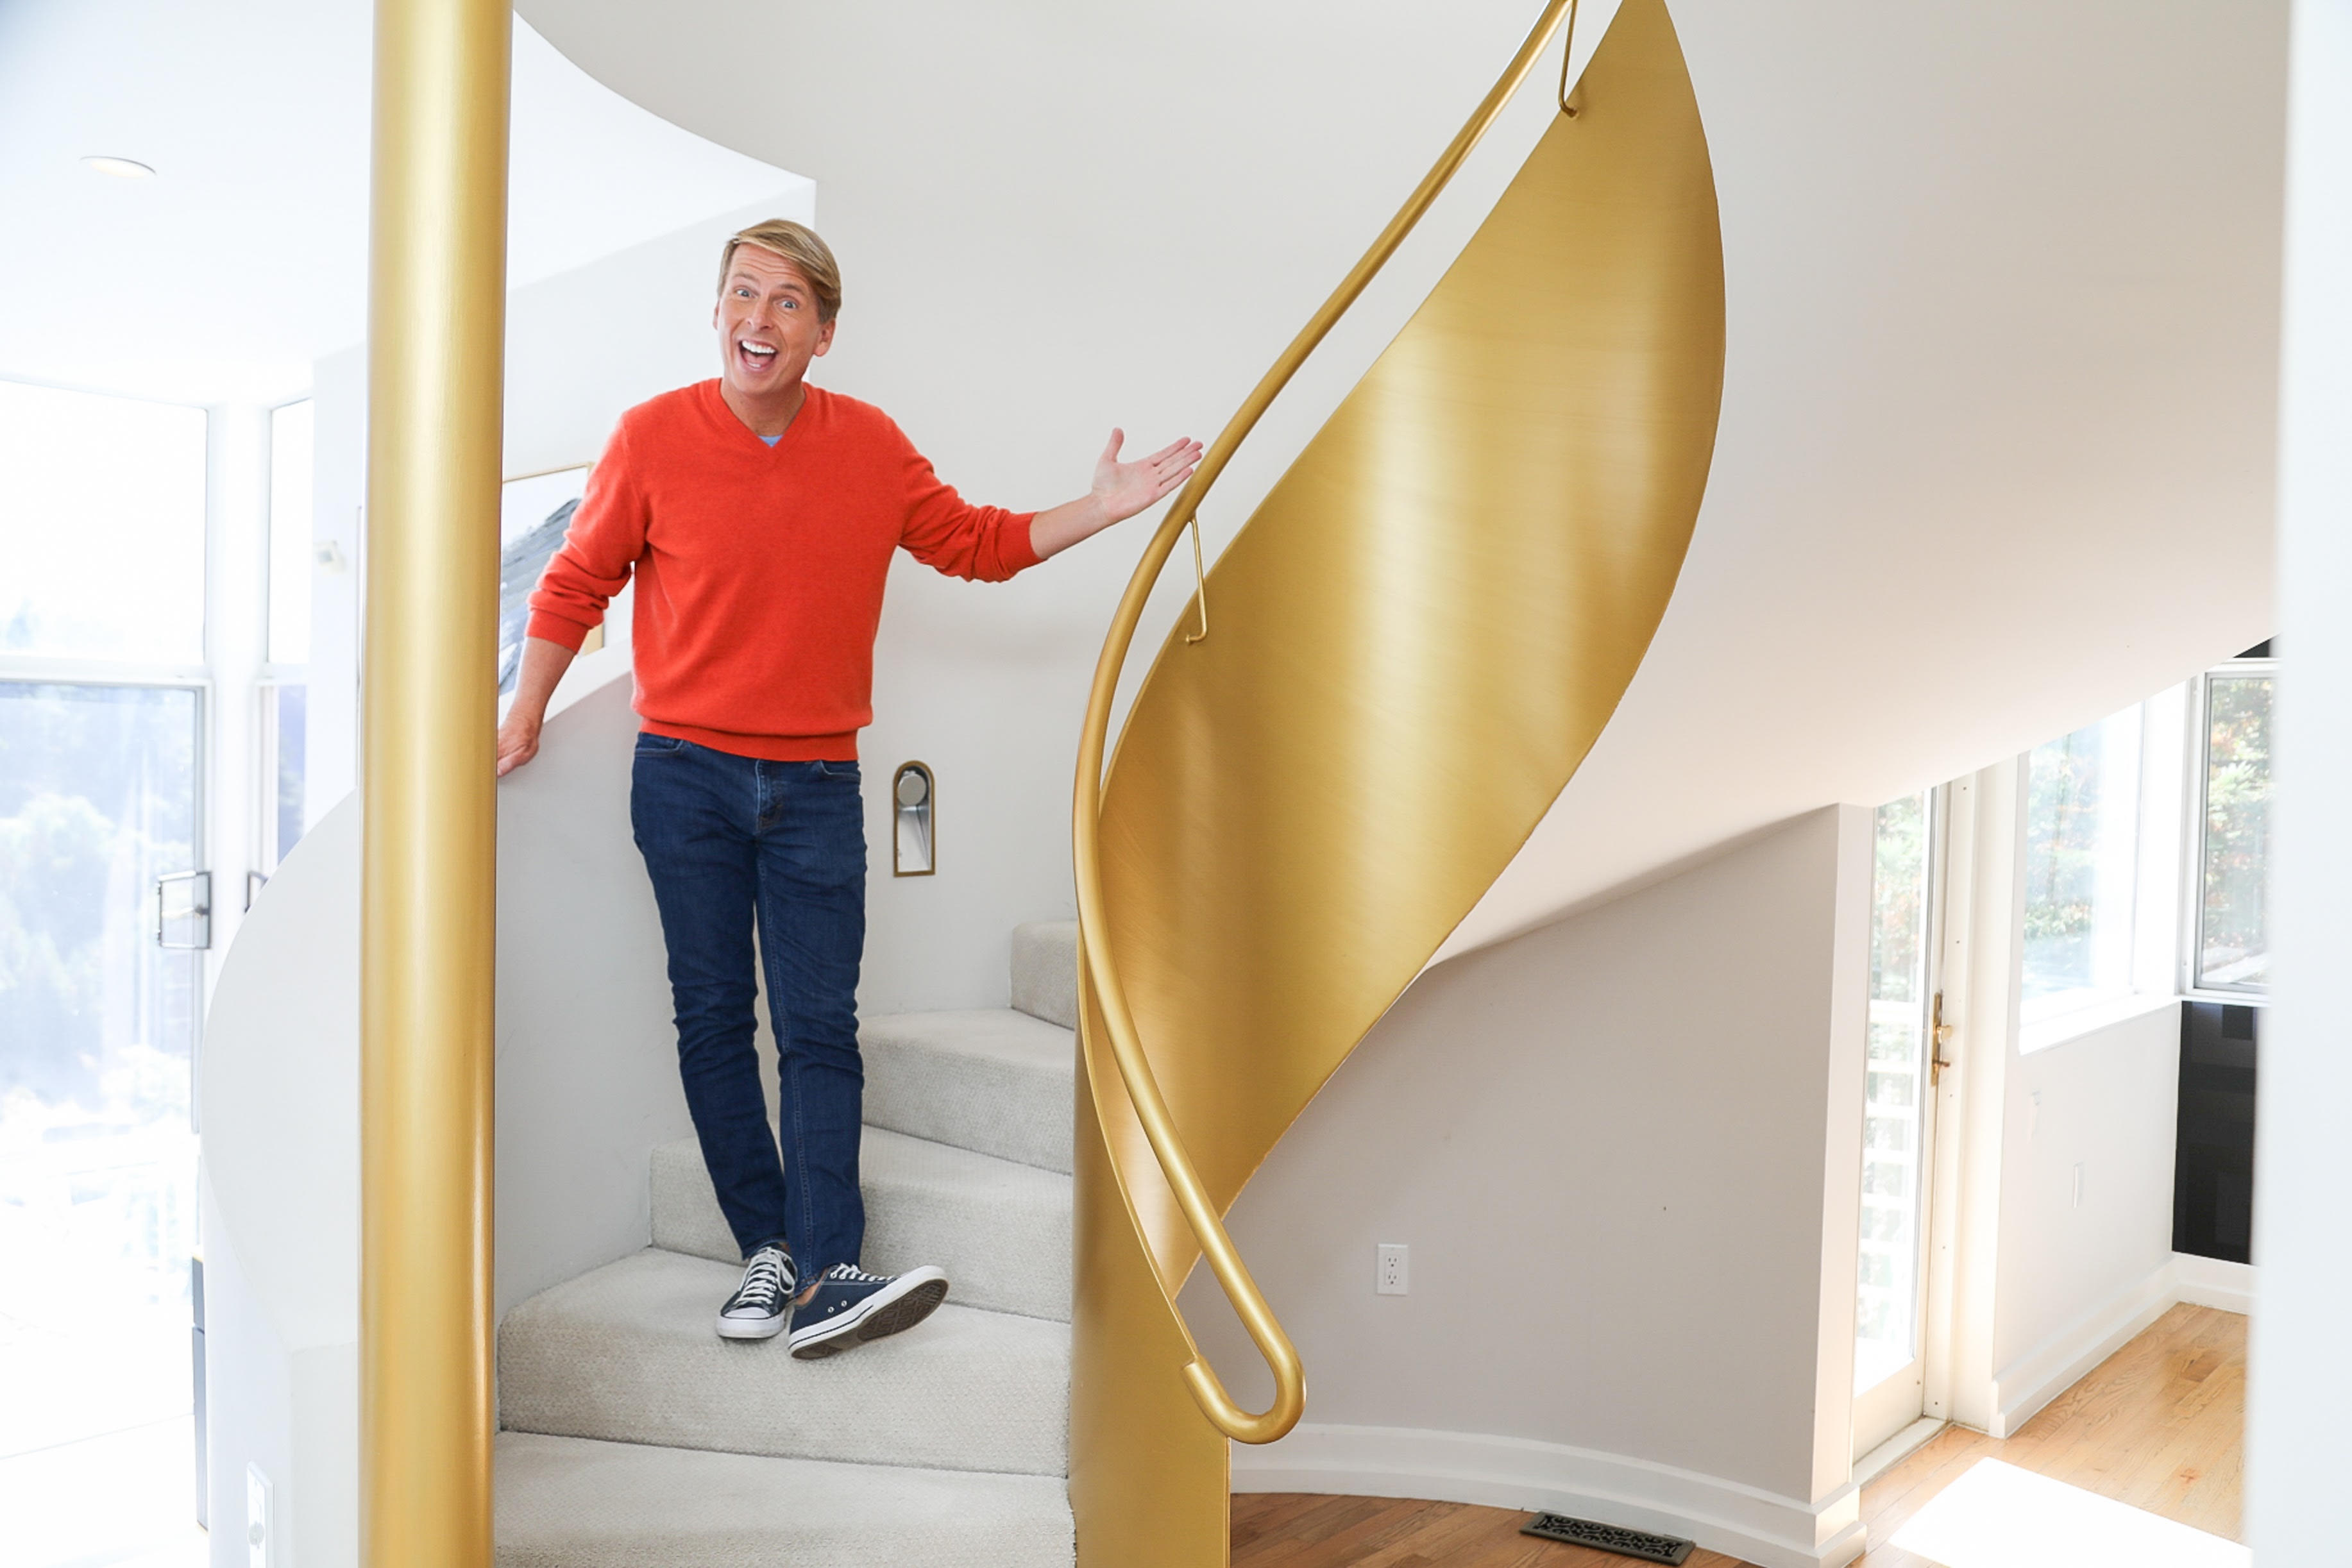 'Zillow Gone Wild' host Jack McBrayer explores the most 'wackadoo' homes — while remaining a 'very good houseguest'